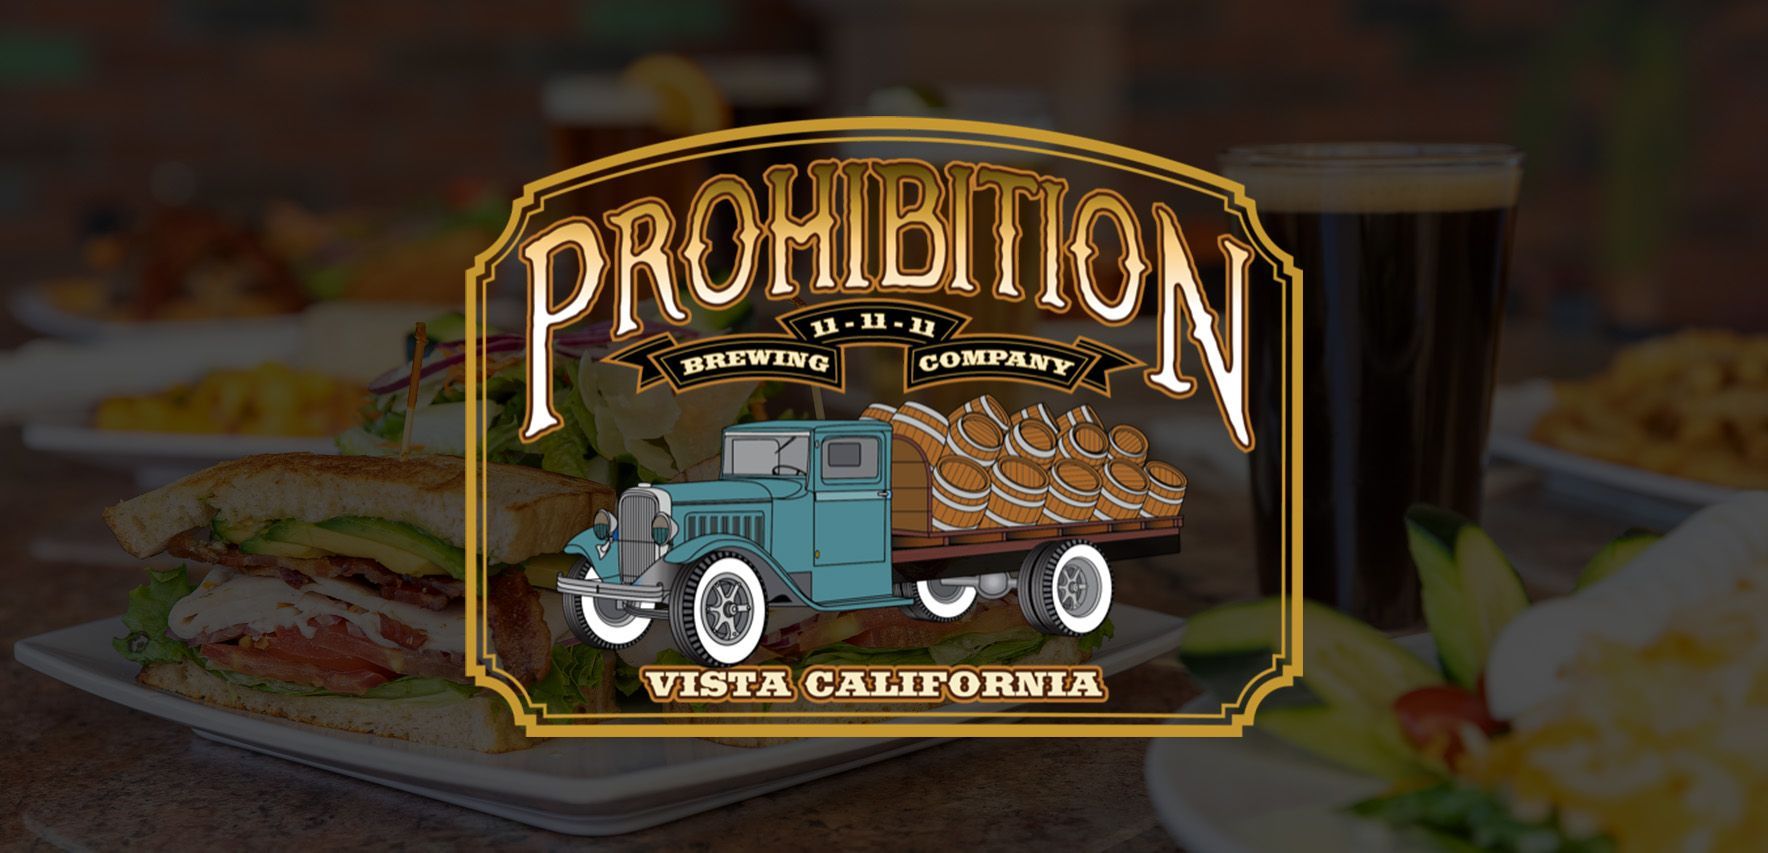 Prohibition Brewing Co., Drinks Menu